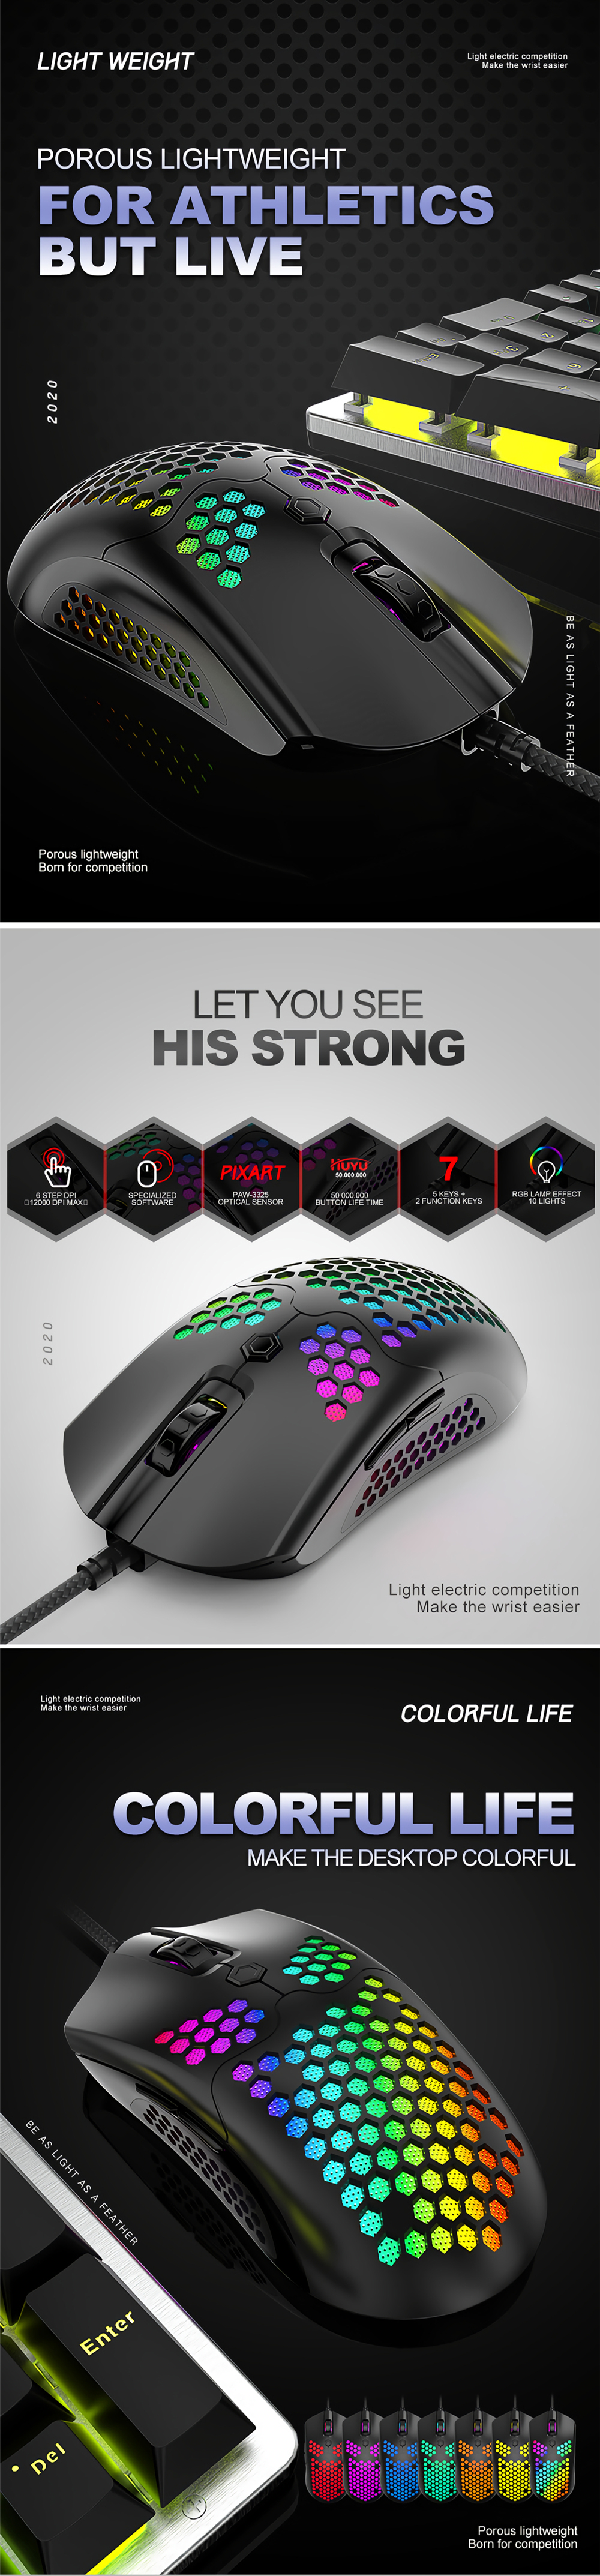 Free-wolf M5 Wired Game Mouse Breathing RGB Colorful Hollow Honeycomb Shape 12000DPI Gaming Mouse USB Wired Gamer Mice for Desktop Computer Laptop PC 1